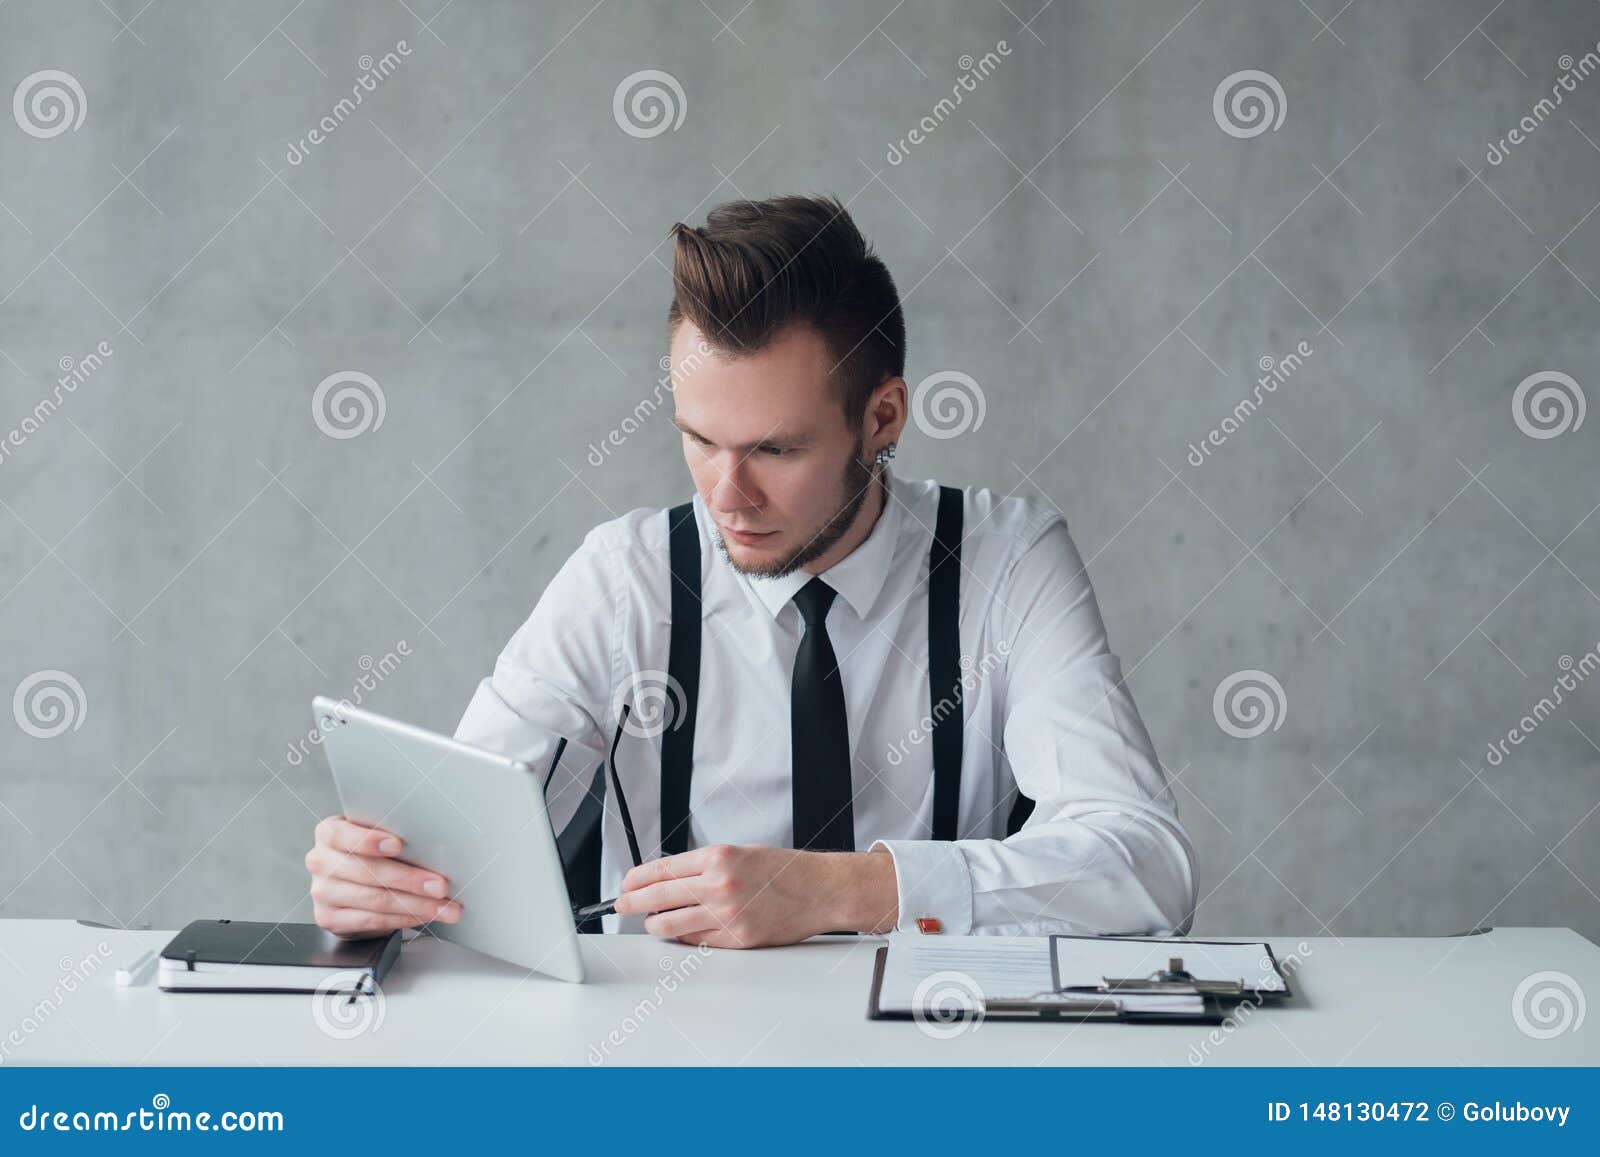 Corporate Lifestyle Serious Young Manager Stock Photo ...